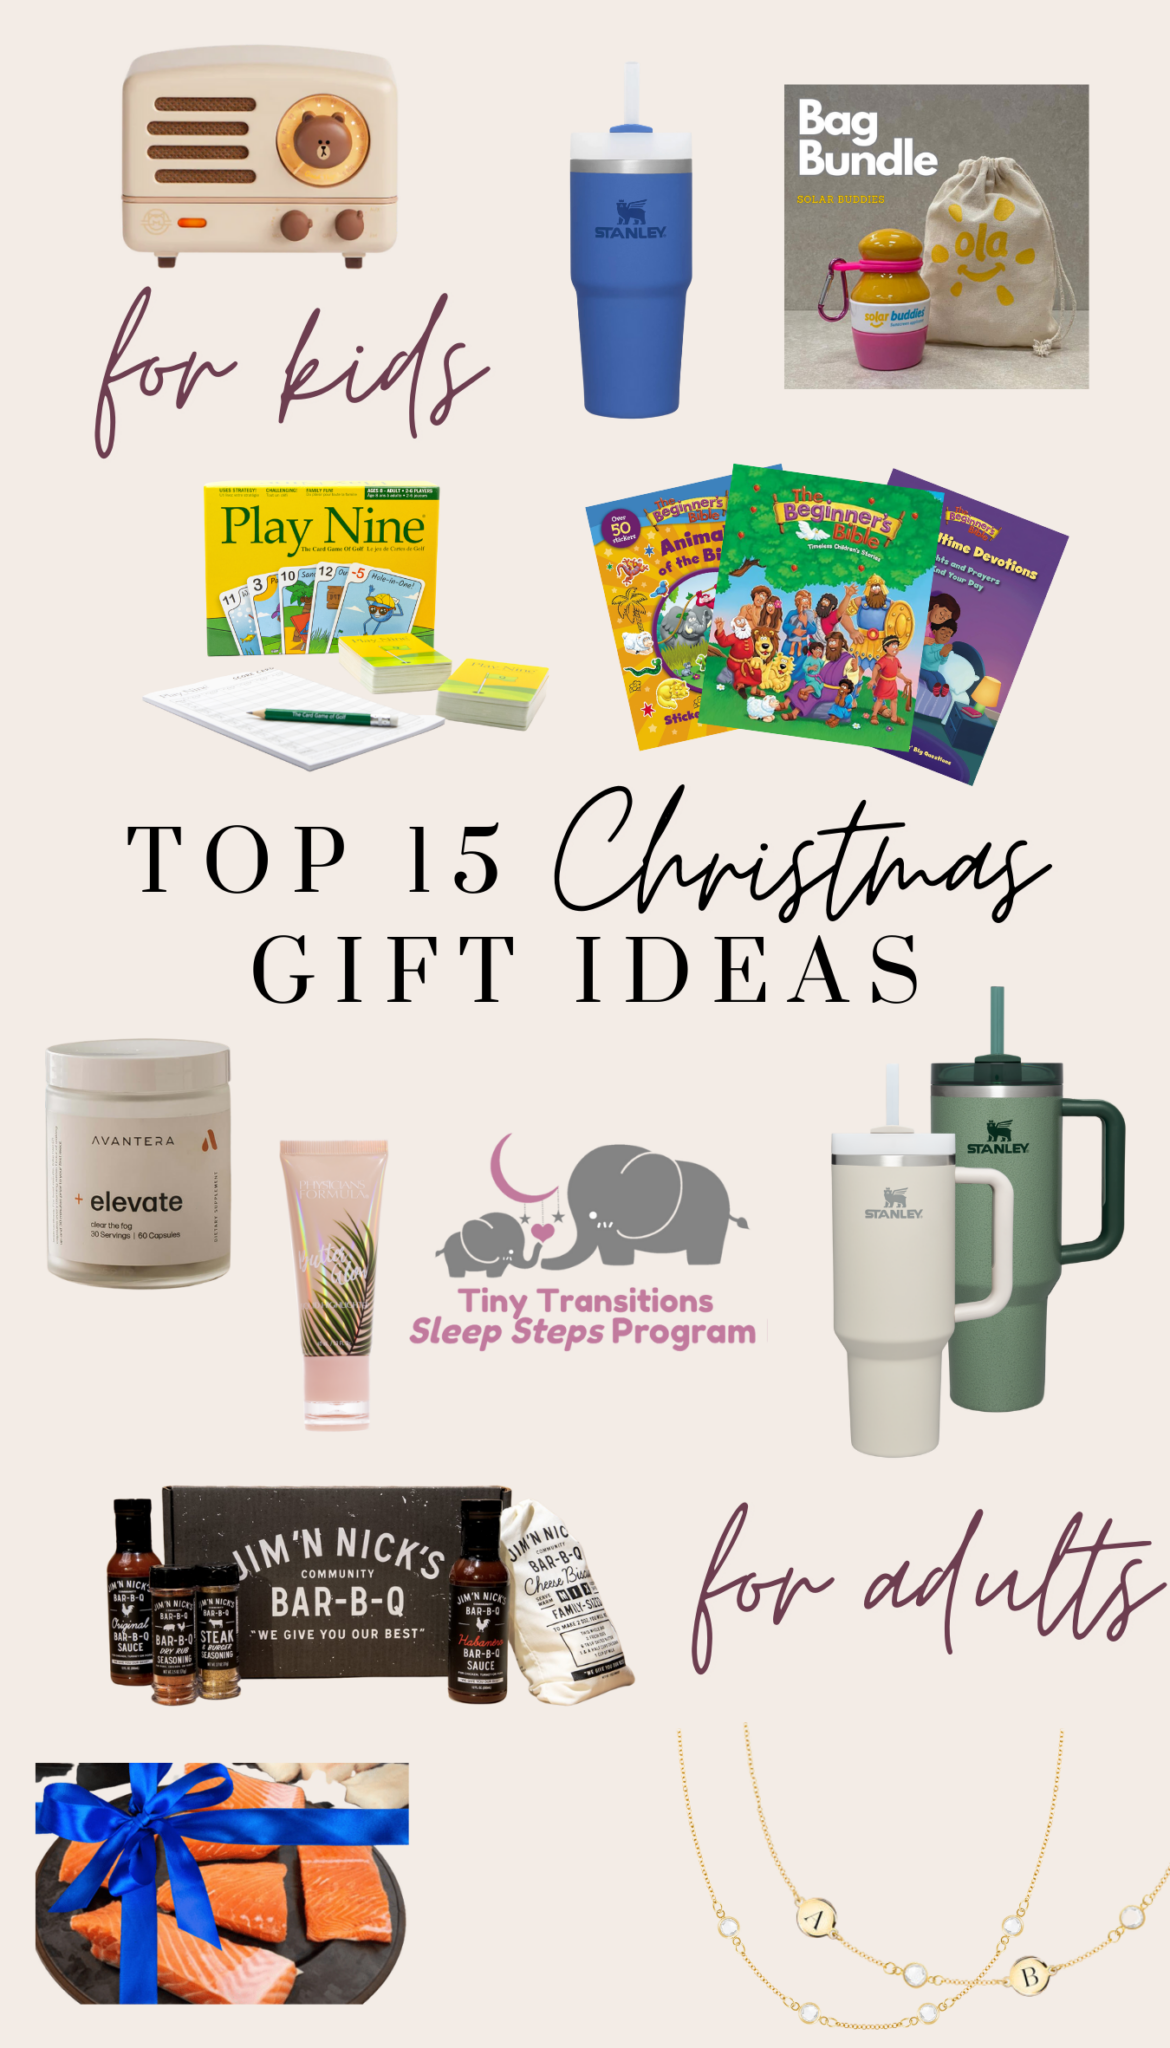 10 Great Gifts For Boy Moms - Her View From Home